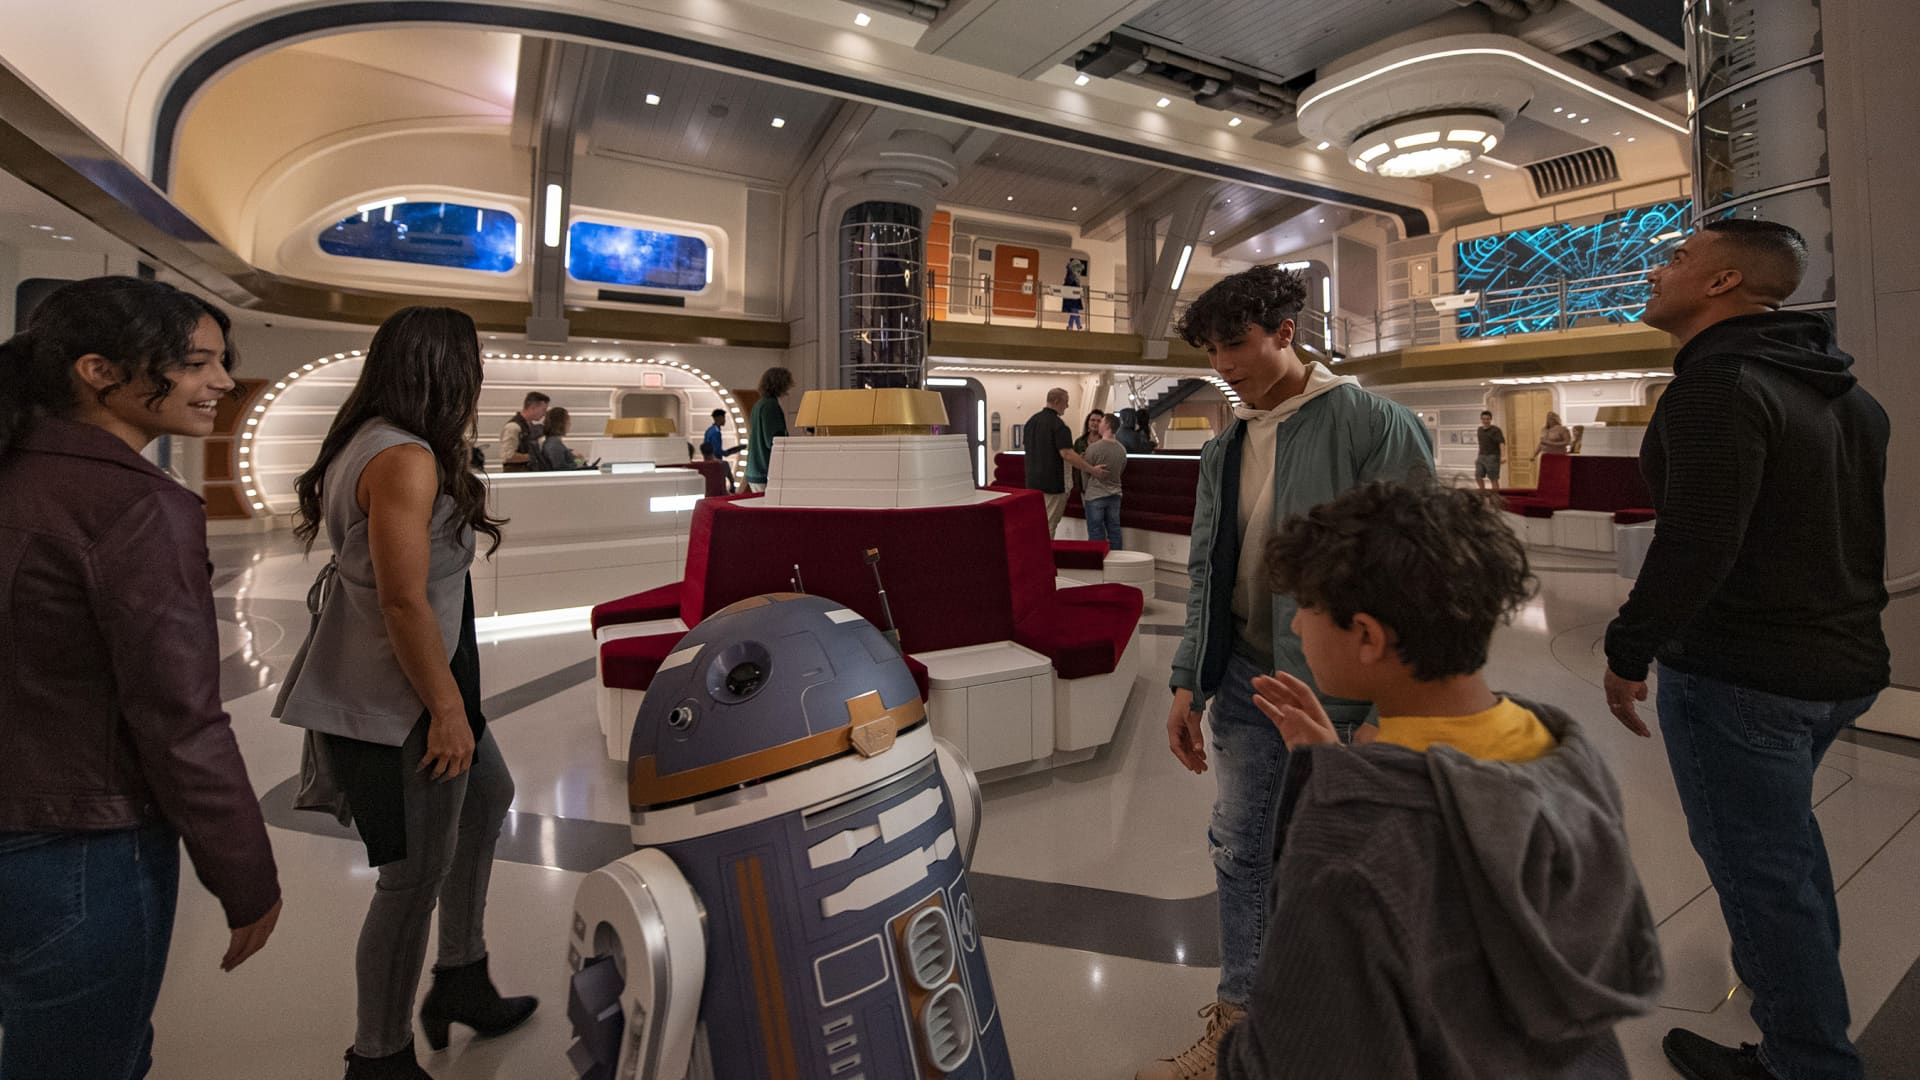 Guests arrive aboard the Chandrila Star Line's Halcyon at Star Wars Galactic Starcruiser.